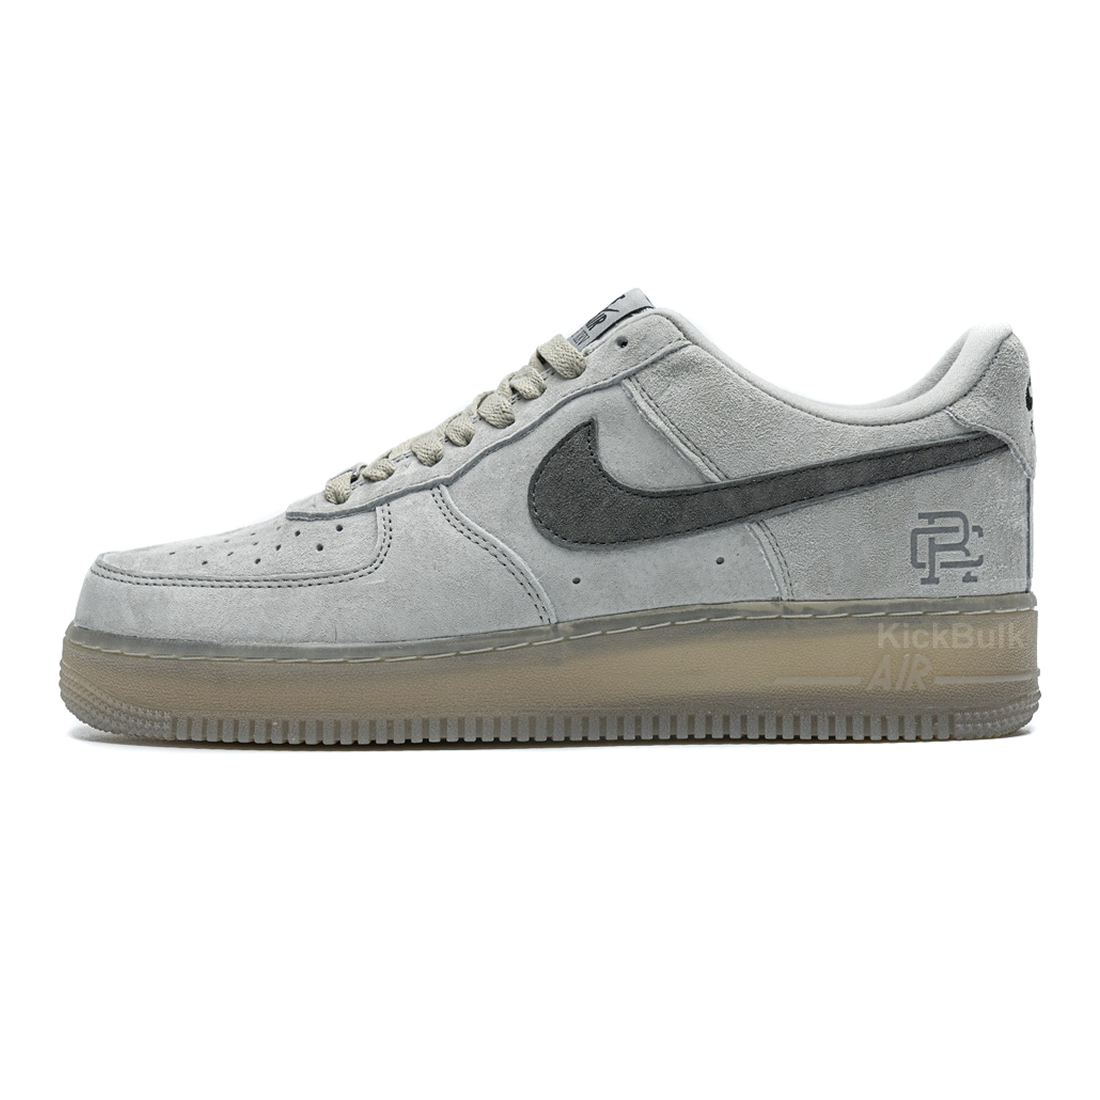 Reigning Champ Nike Air Force 1 Low Suede Light Grey Aa1117 118 1 - www.kickbulk.co